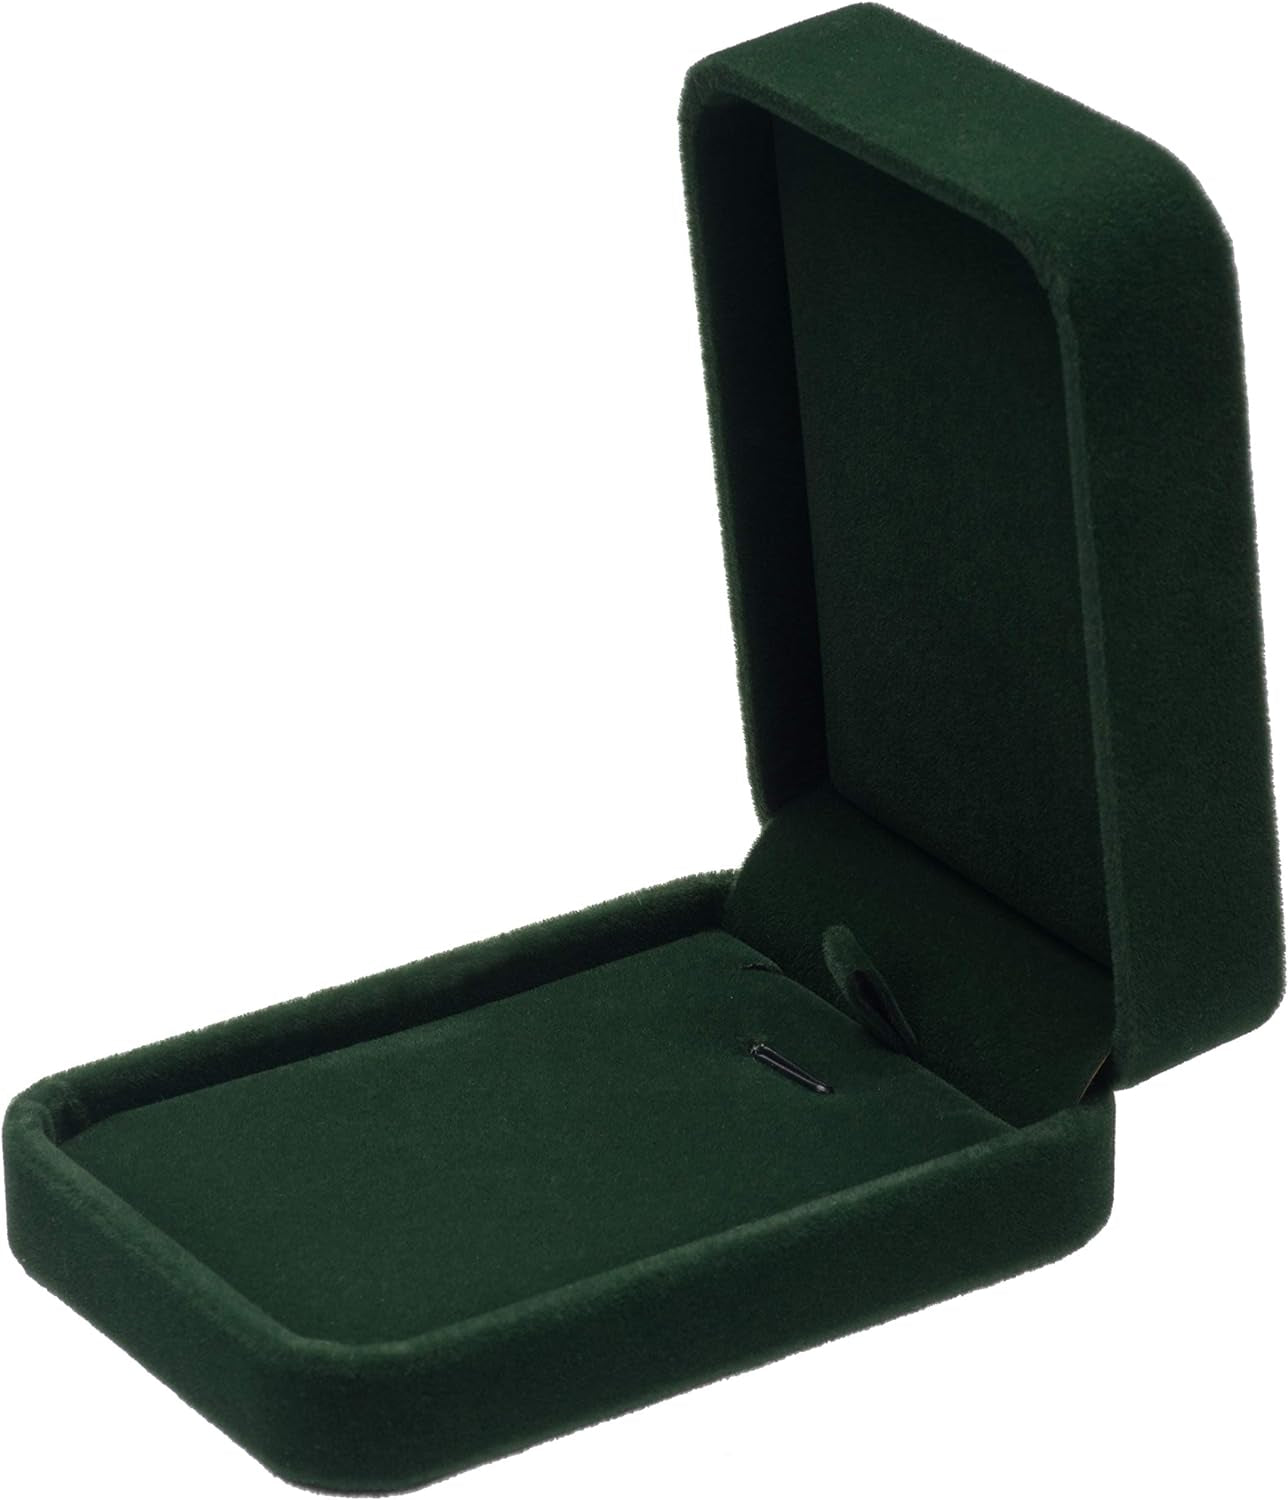 Classic Velvet Jewelry Gift Box Case for Necklace Pendant (Green)